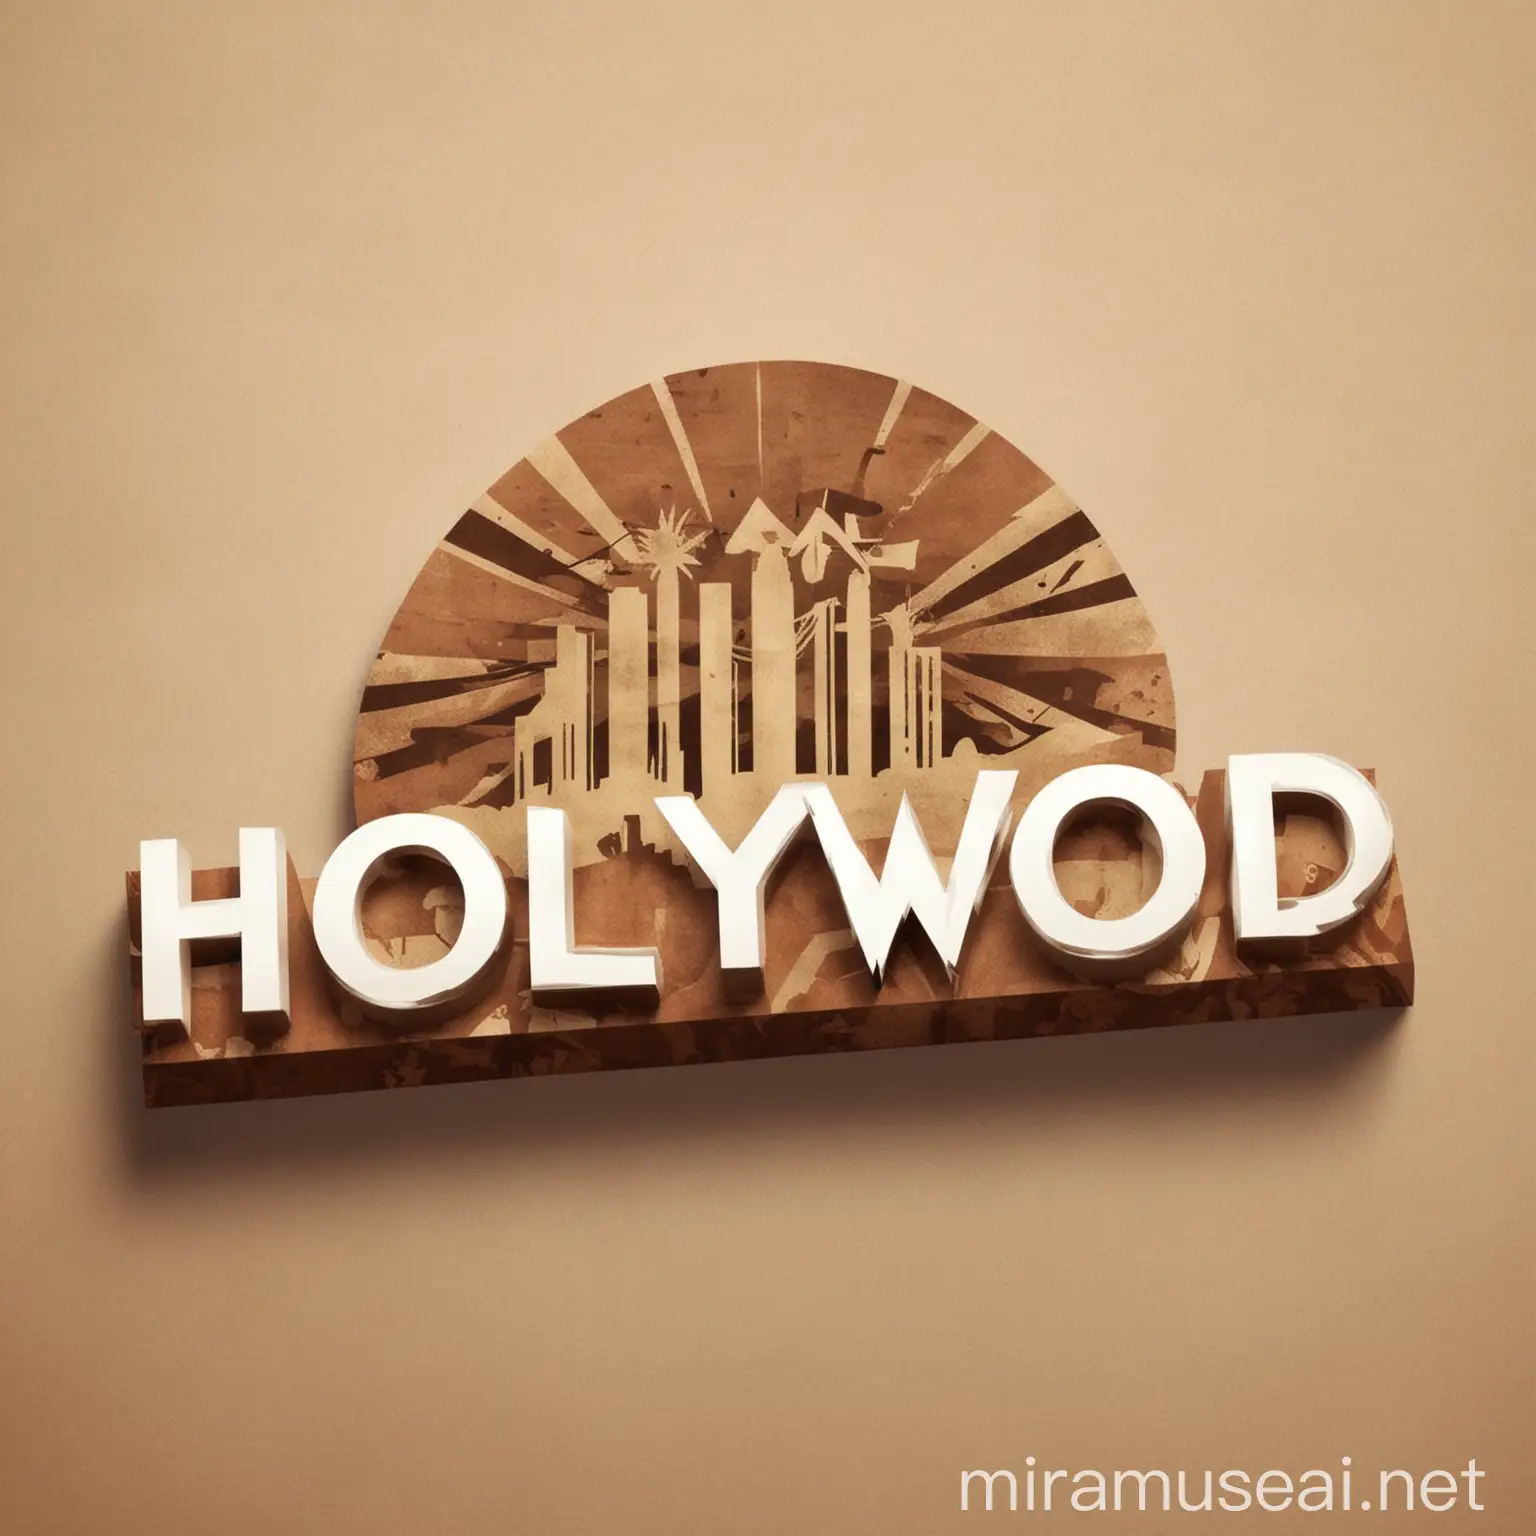 create a logo for: Hollywood Asian Desk, which is a boutique firm for serving Asian brands exploring in Hollywood marketing, fashion lifestyle, tech and content creation